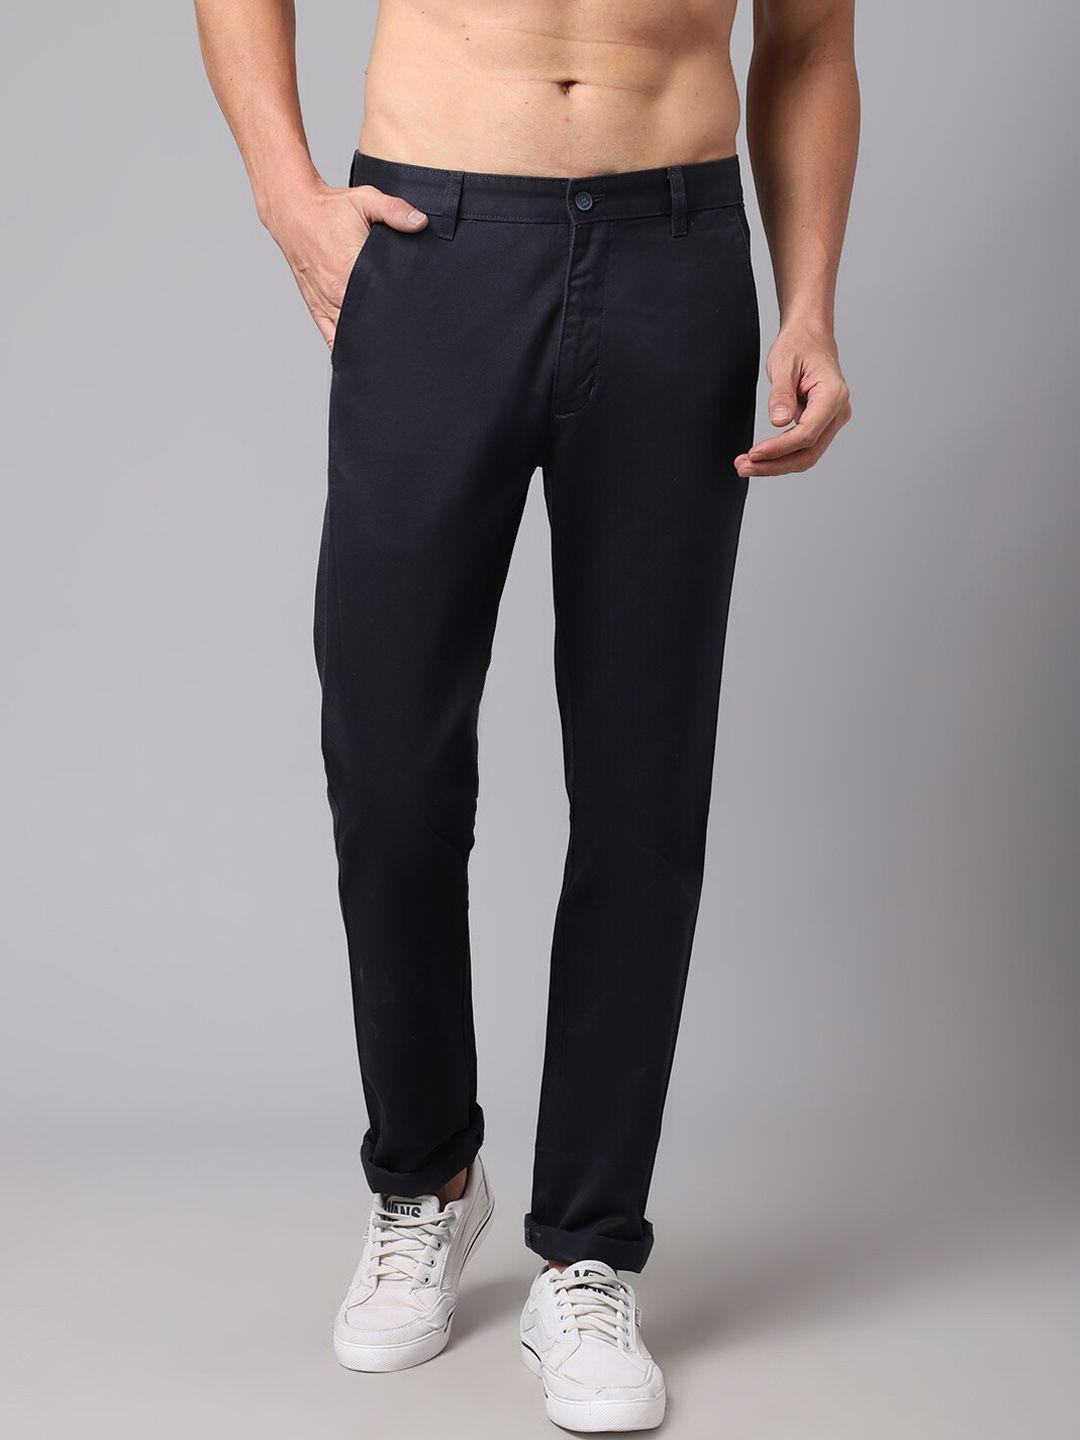 cantabil men navy blue chinos cotton trousers